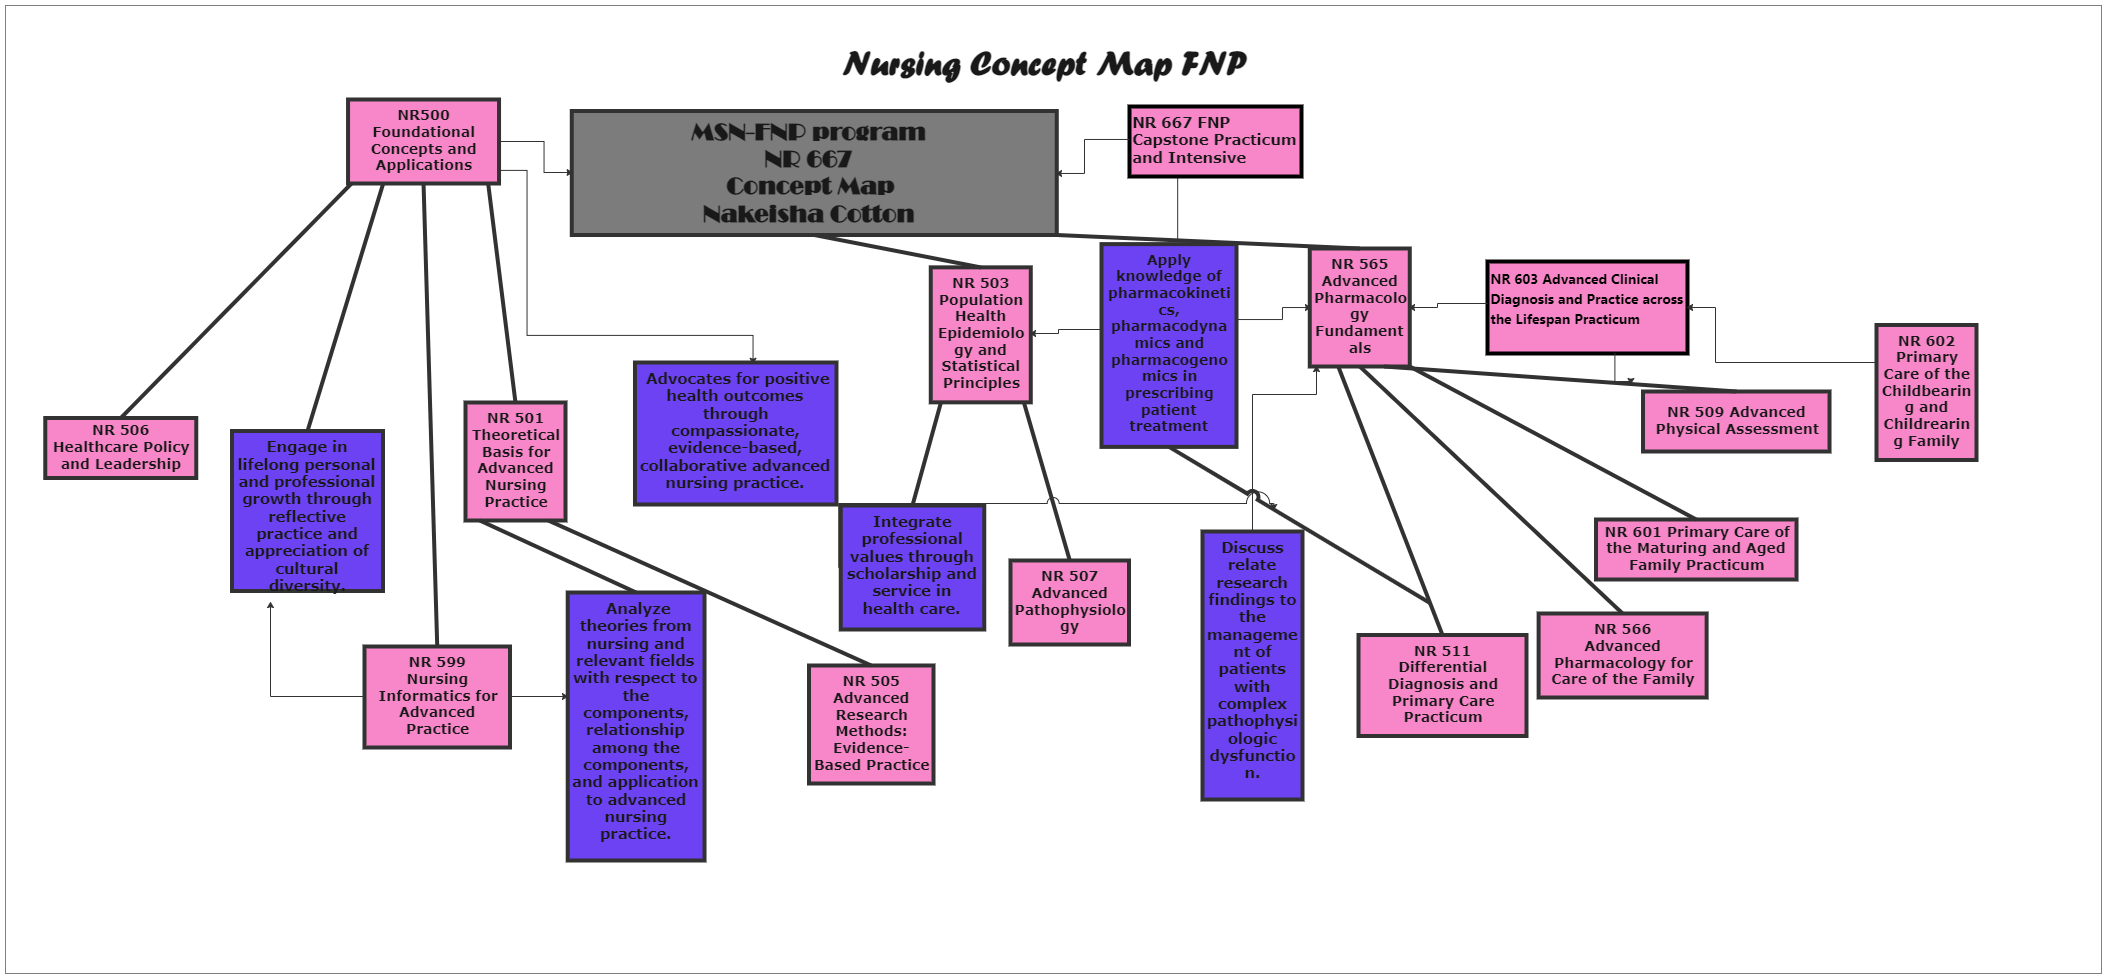 Nursing Concept Map Example shows the concept map showcasing different areas of nursing. It should be noted here that a concept map is a diagram that depicts suggested relationships between concepts as they typically represent ideas and information as box